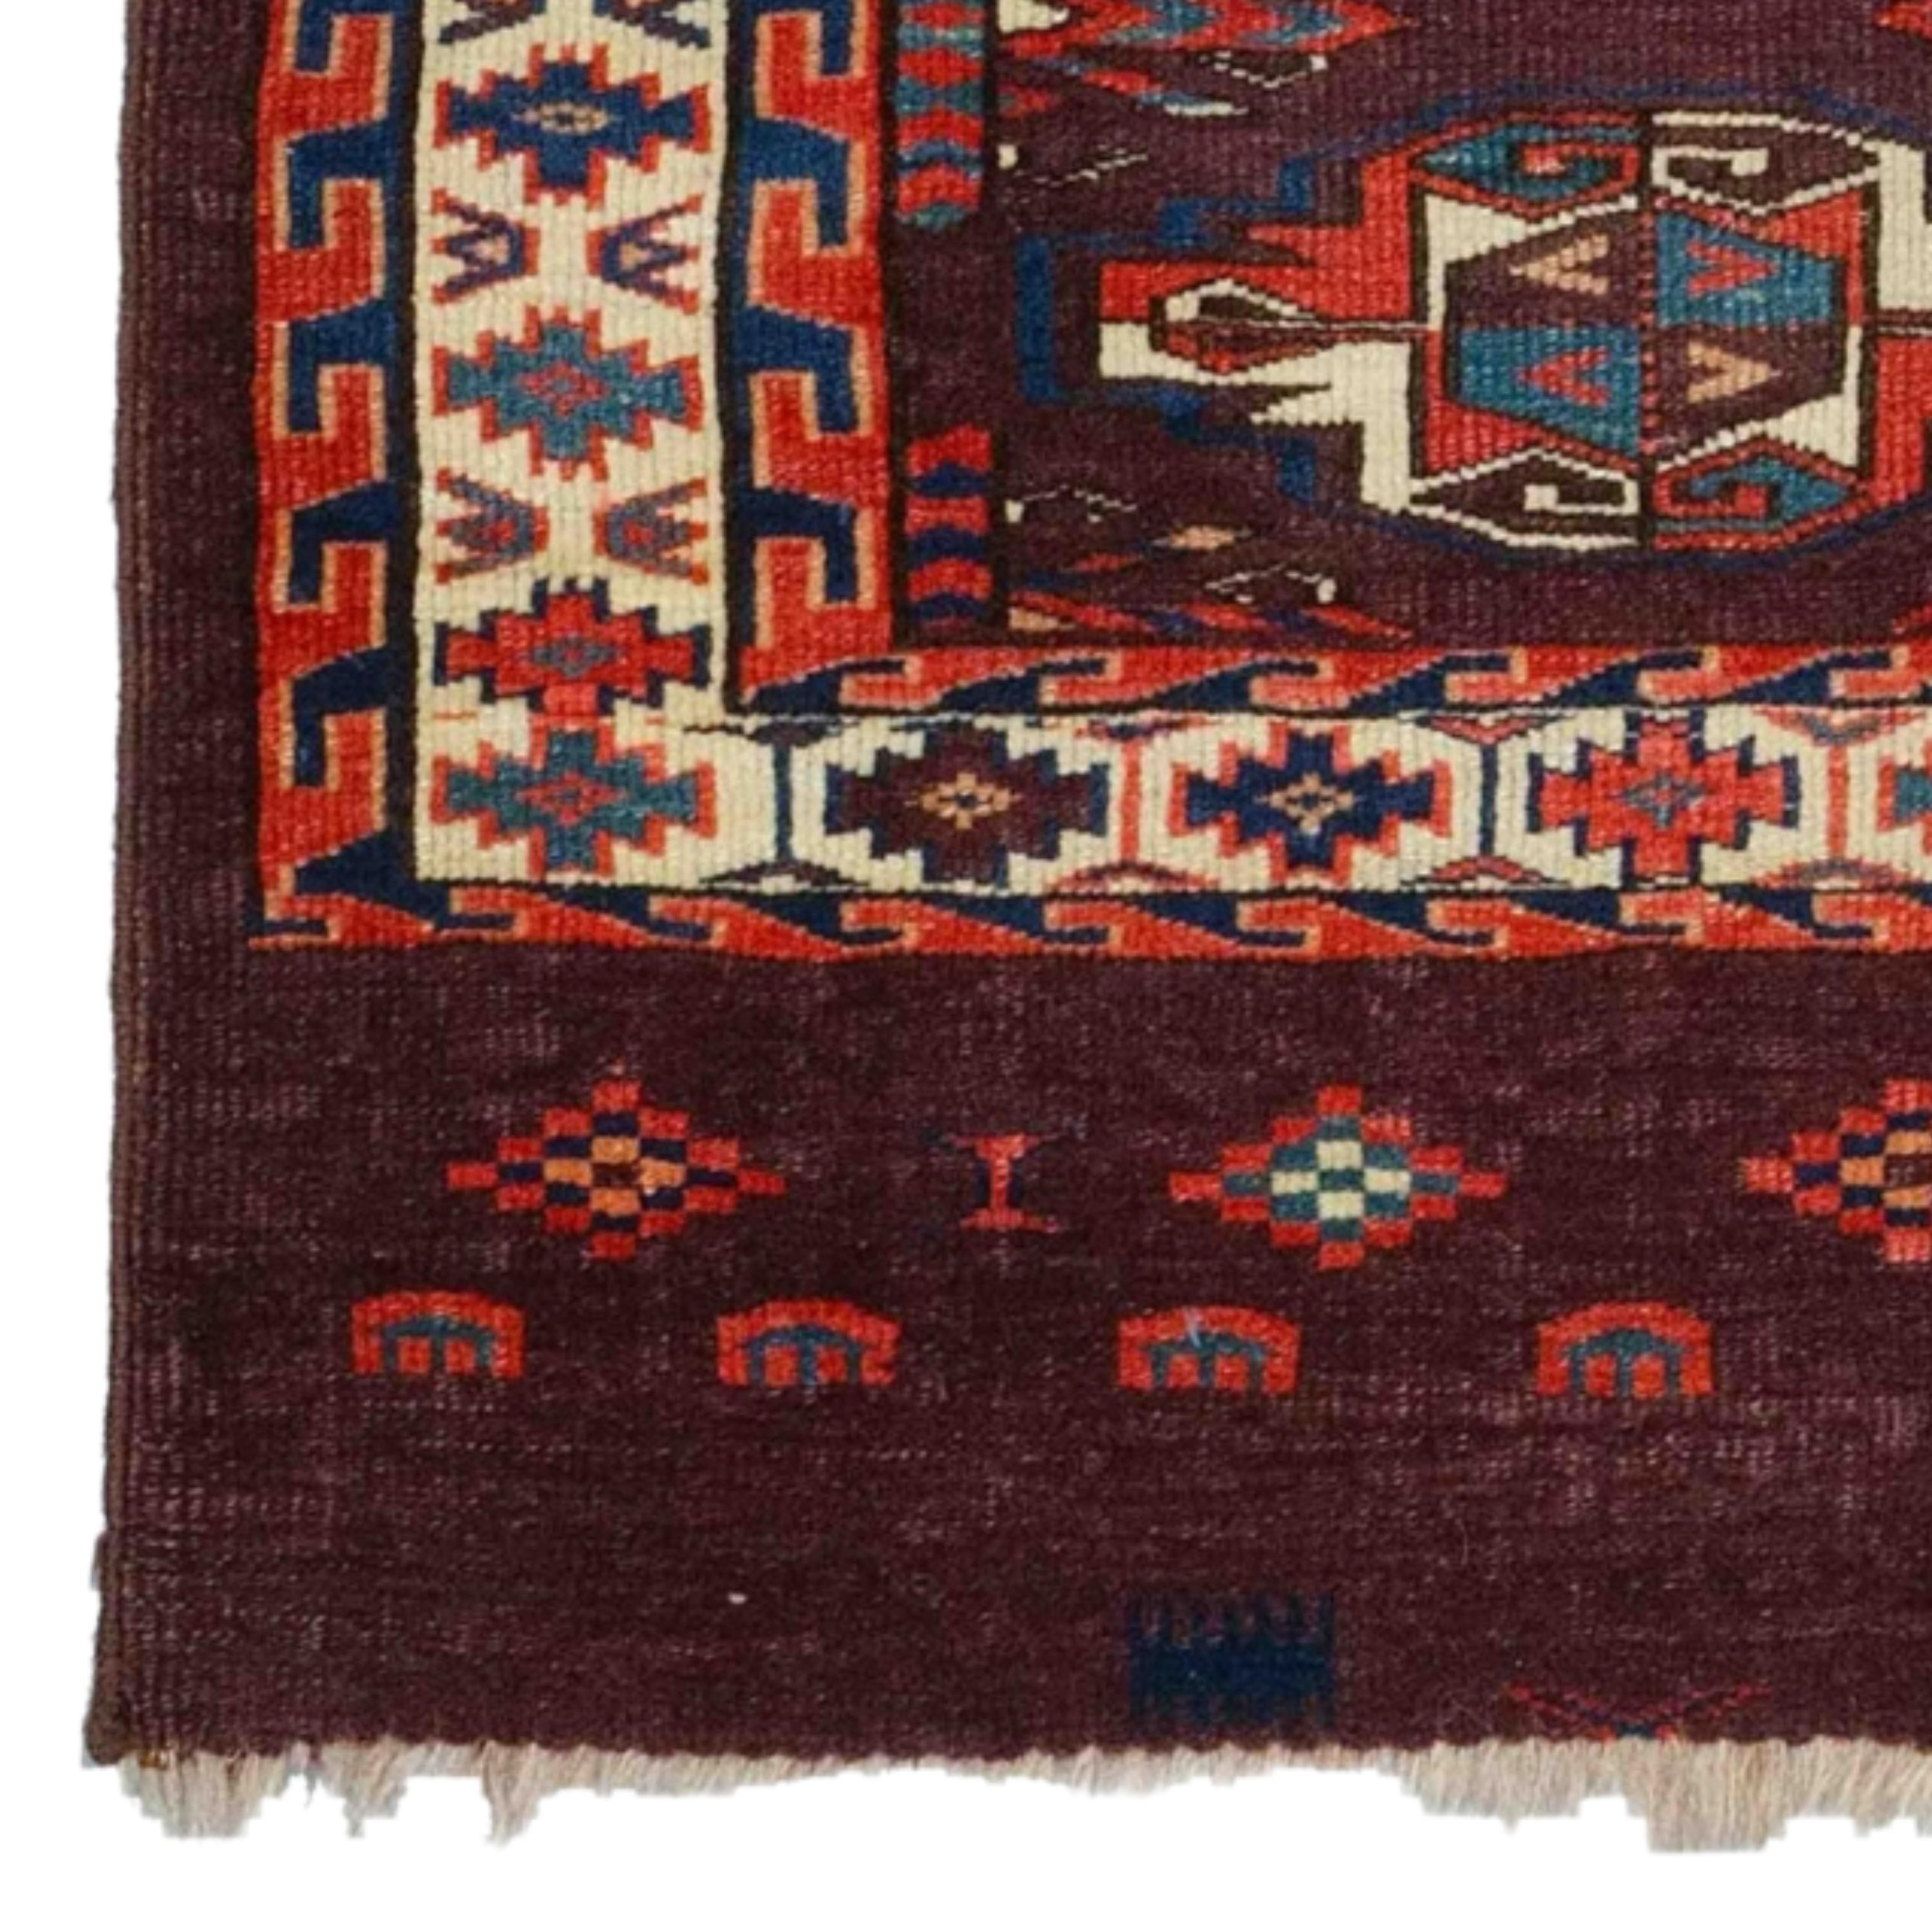 This exquisite 19th-century Turkmen chuval rug is a work of art, carefully woven and withstood the test of time. The rich color palette and intricate patterns reveal the impressive beauty of this rug, each carefully selected and placed. Even though